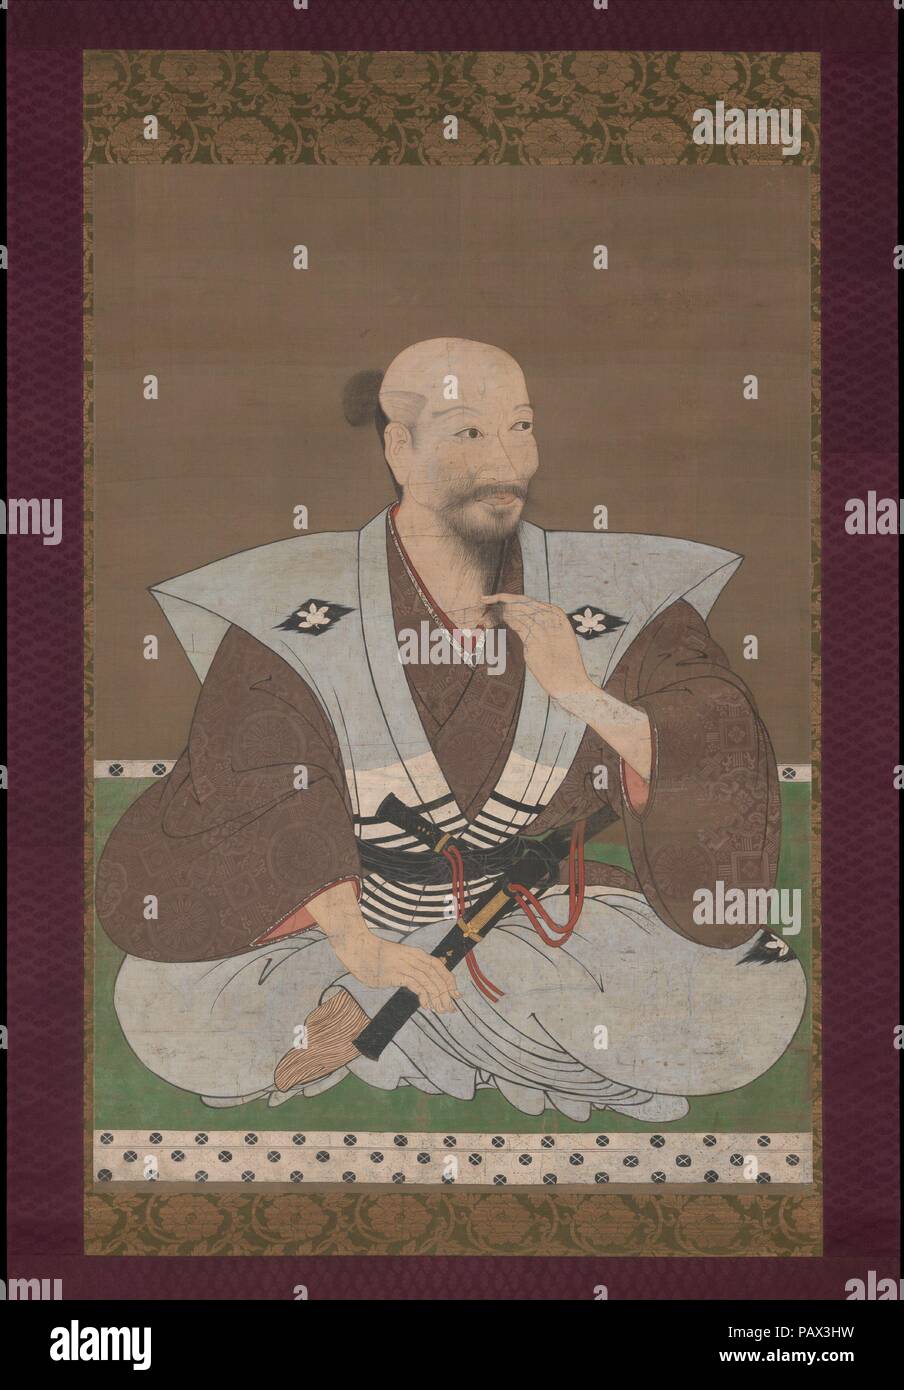 Portrait of a Warrior. Artist: Unidentified Artist Japanese, late 16th century. Culture: Japan. Dimensions: Image: 47 13/16 x 33 9/16 in. (121.4 x 85.2 cm)  Overall with mounting: 86 3/4 x 41 5/8 in. (220.3 x 105.7 cm)  Overall with knobs: 86 3/4 x 45 1/8 in. (220.3 x 114.6 cm). Date: late 16th century.  This newly discovered painting depicting an unidentified warrior is executed at a size usually reserved for portraits of emperors and shoguns, and it ranks among the largest and finest secular portraits from Japan. Although the family crest of wild orange is associated with the Shibata family  Stock Photo